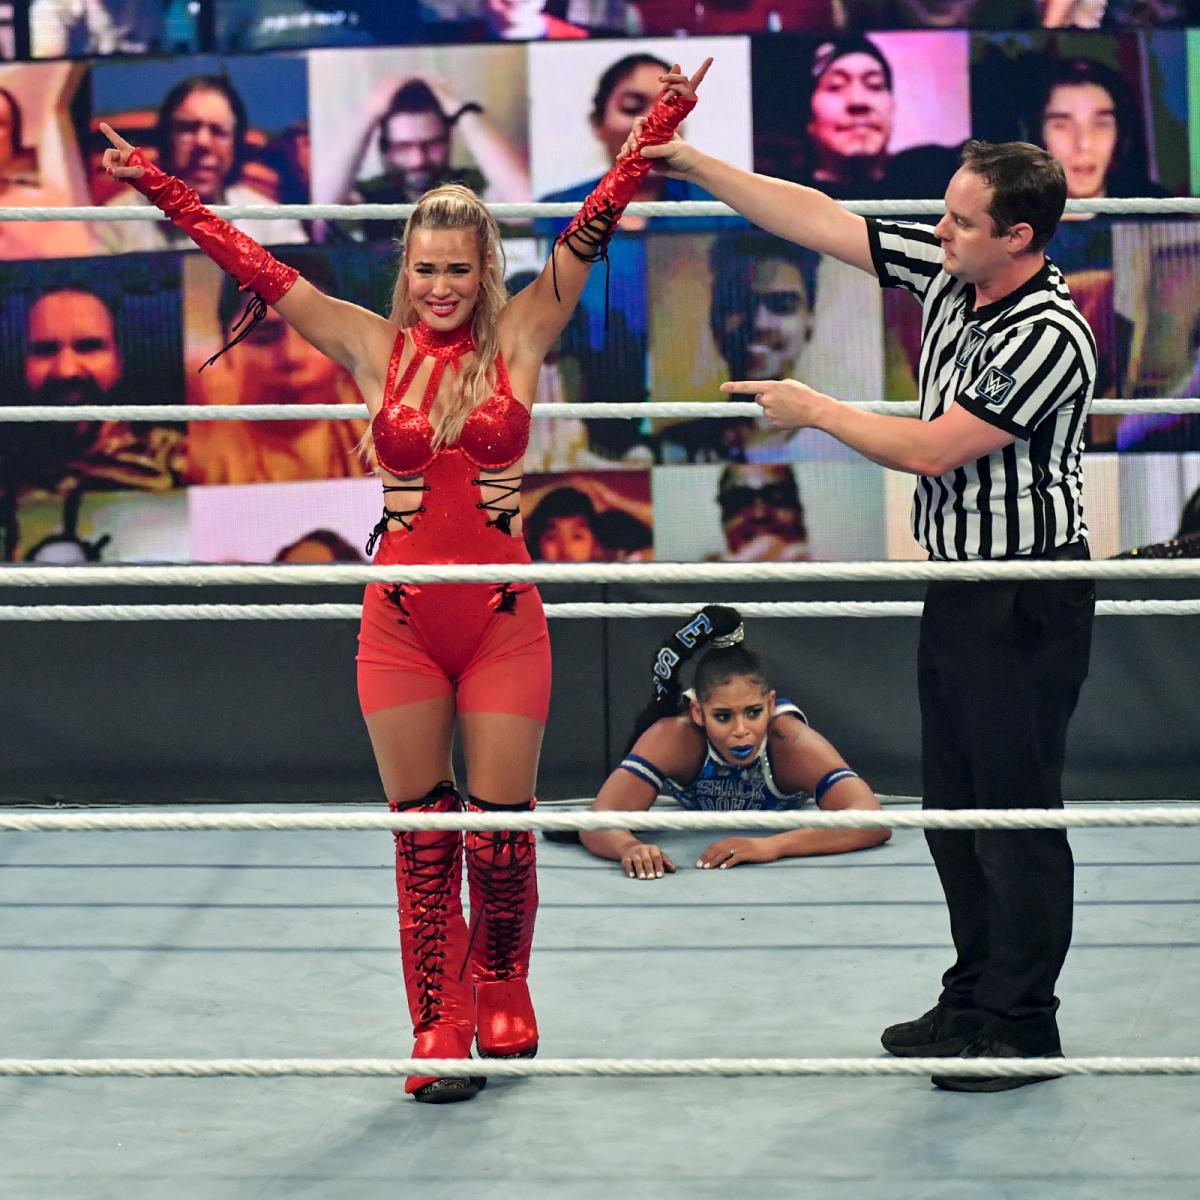 Lana was the final participant in the women's Battle Royal